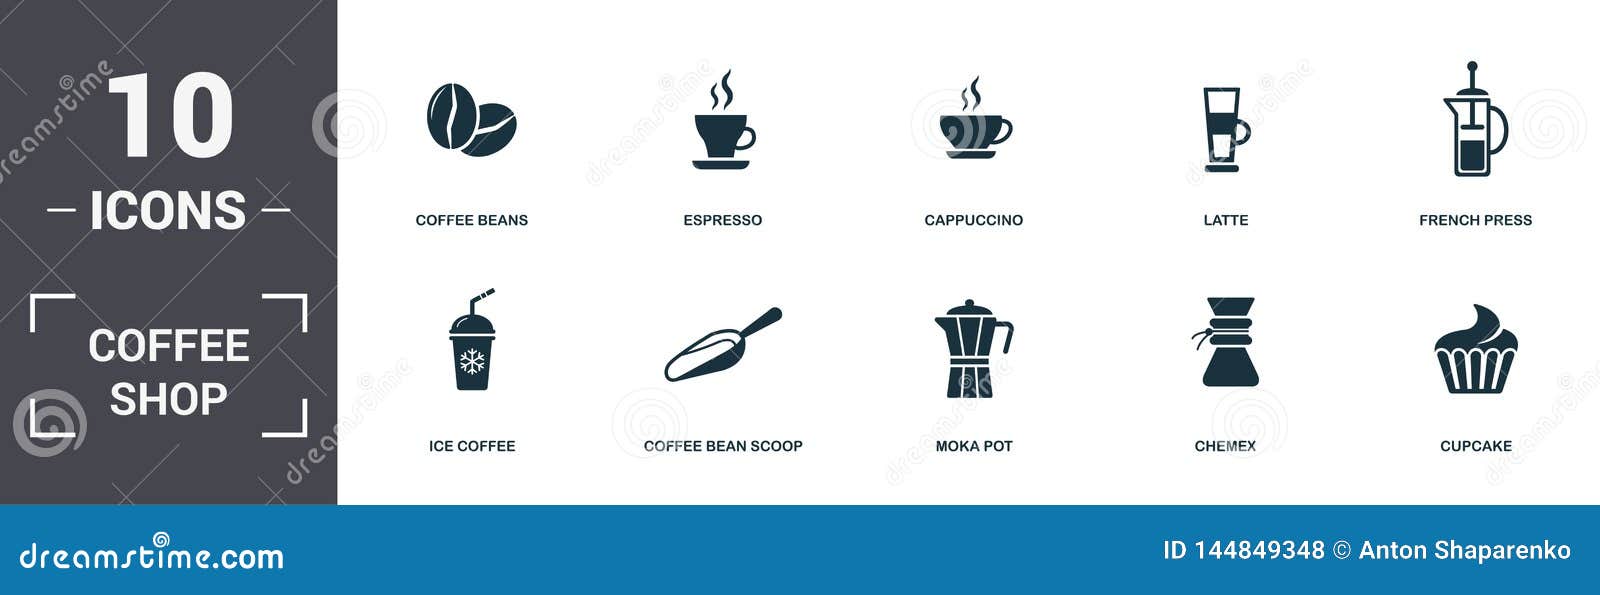 https://thumbs.dreamstime.com/z/coffe-shop-set-icons-collection-includes-simple-elements-such-as-coffee-beans-espresso-cappuccino-latte-french-press-bean-scoop-144849348.jpg